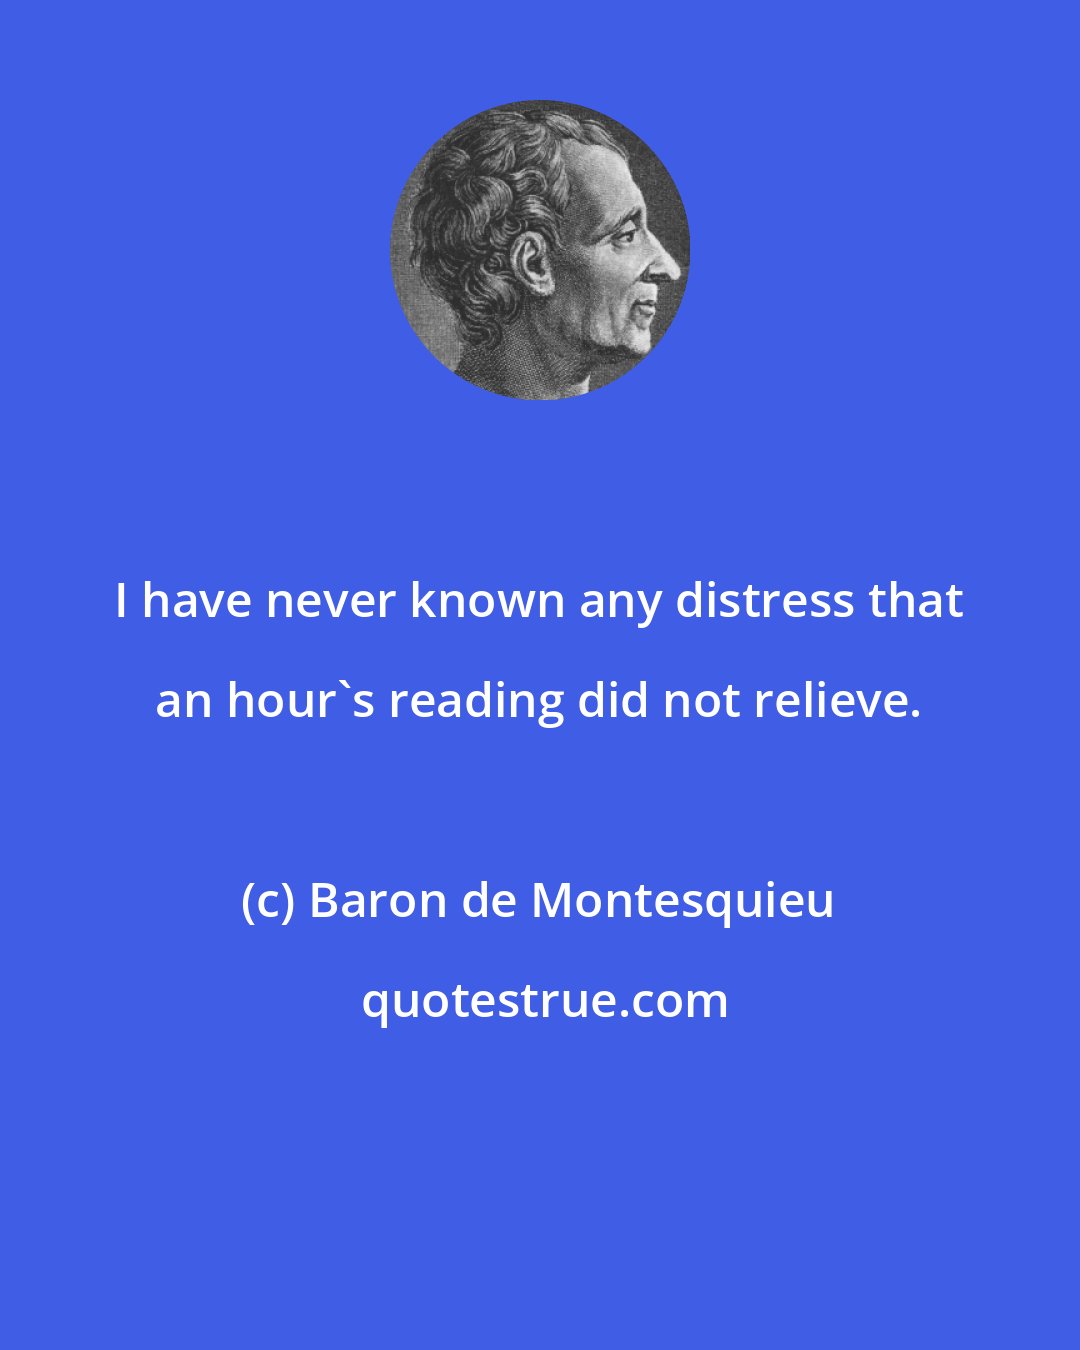 Baron de Montesquieu: I have never known any distress that an hour's reading did not relieve.